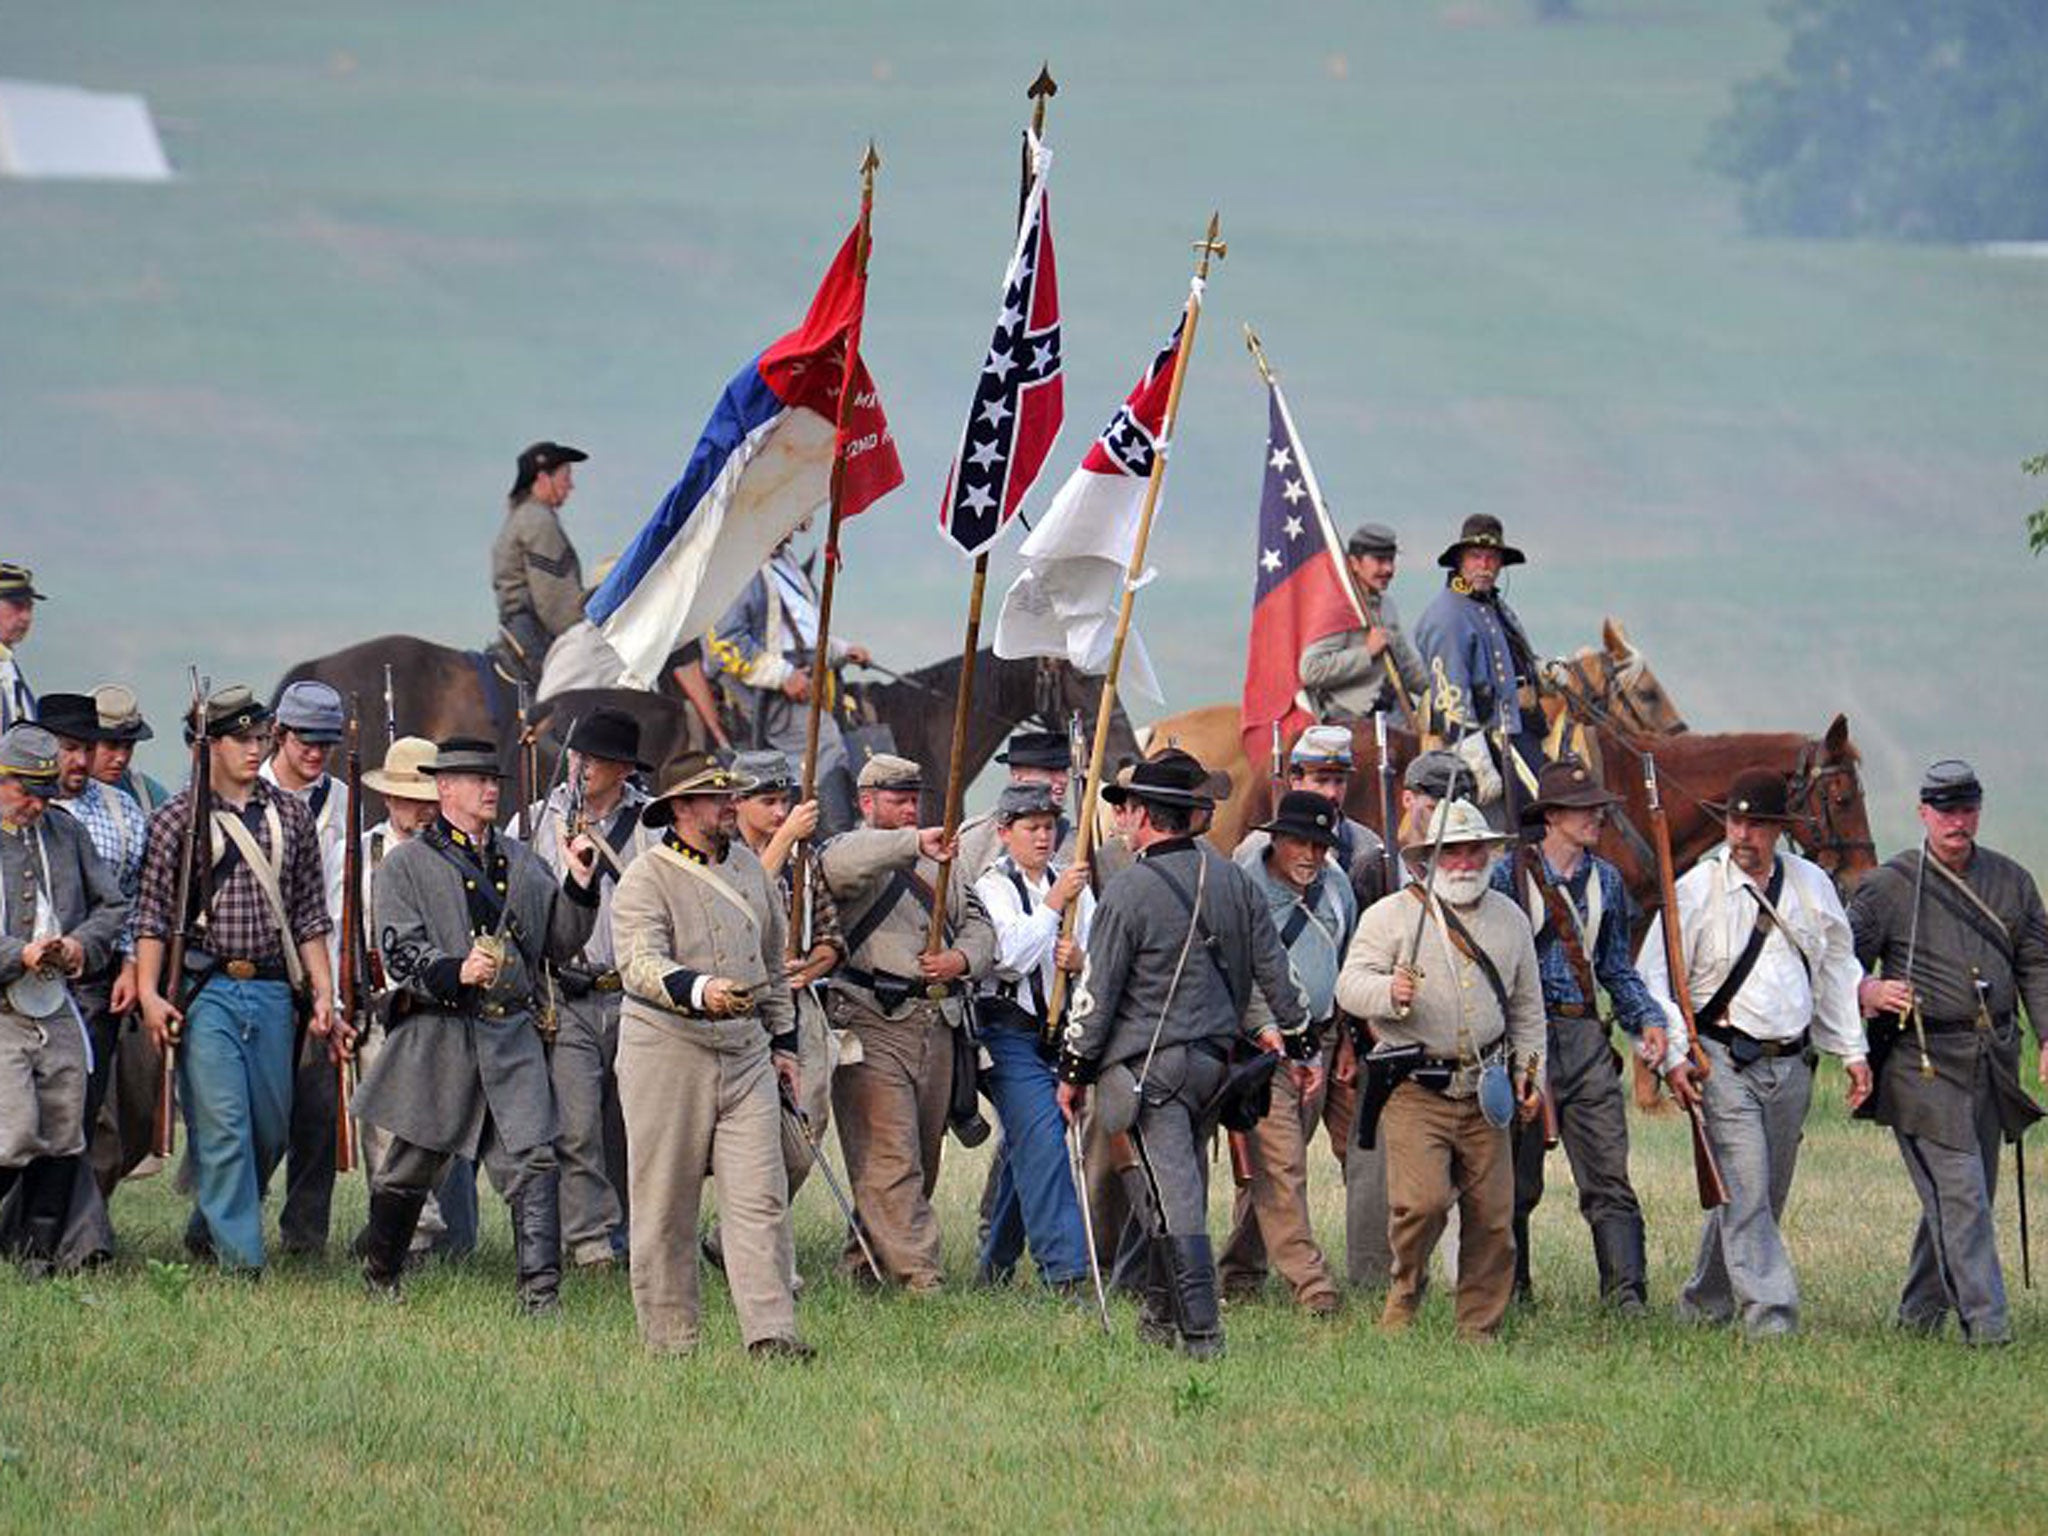 Confederate troops advance in a re-enactment of the 1863 Battle of Gettysburg, during which 7,000 soldiers died